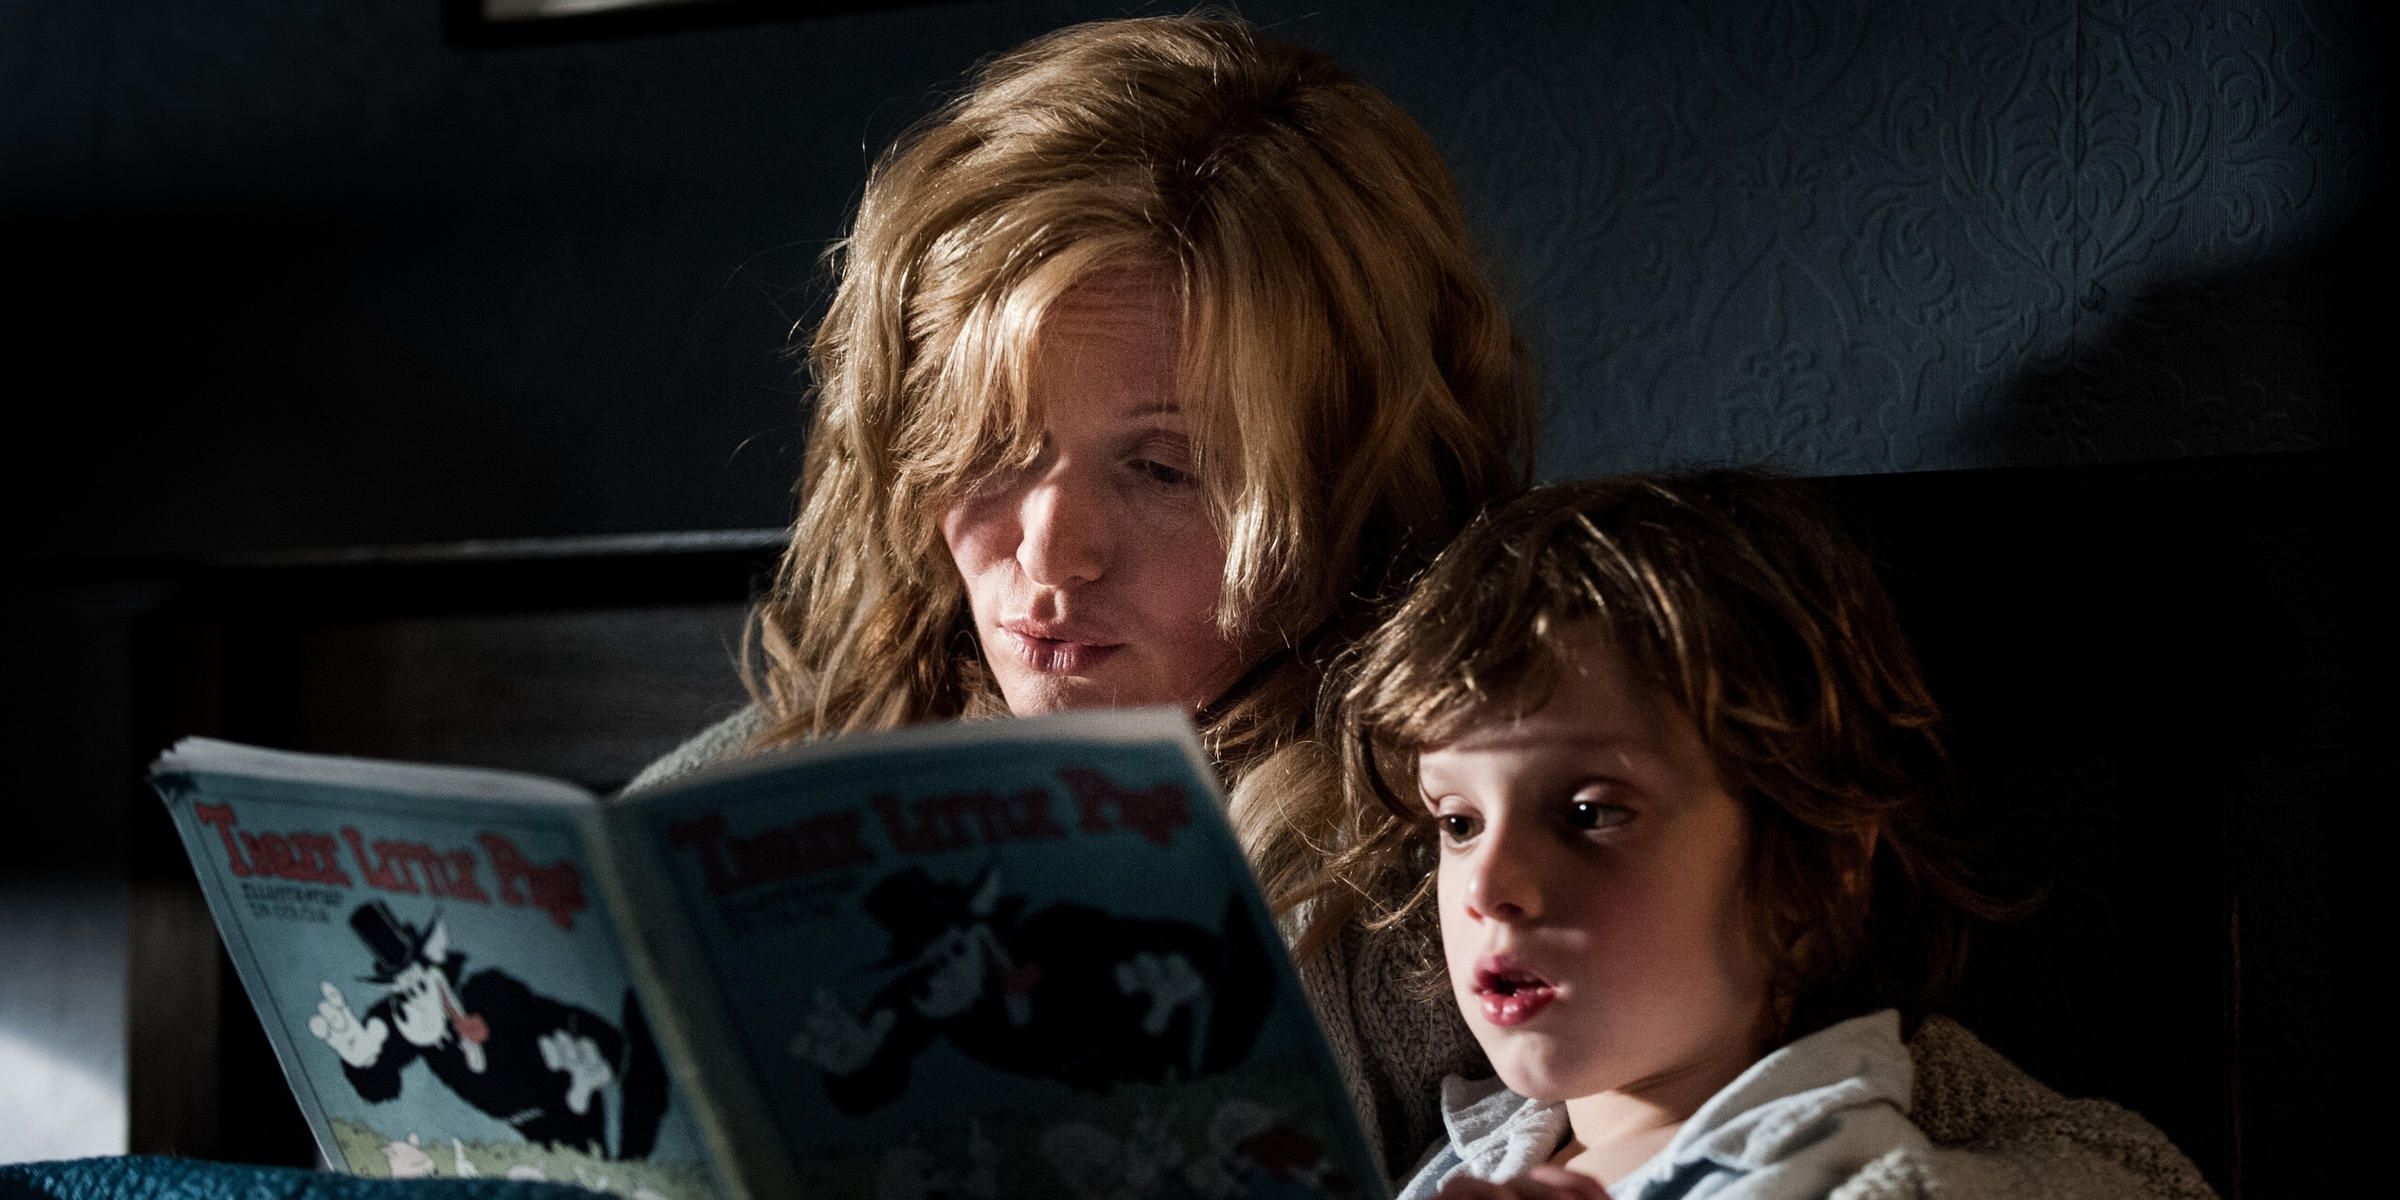 Amielia reading her son a book in The Babadook